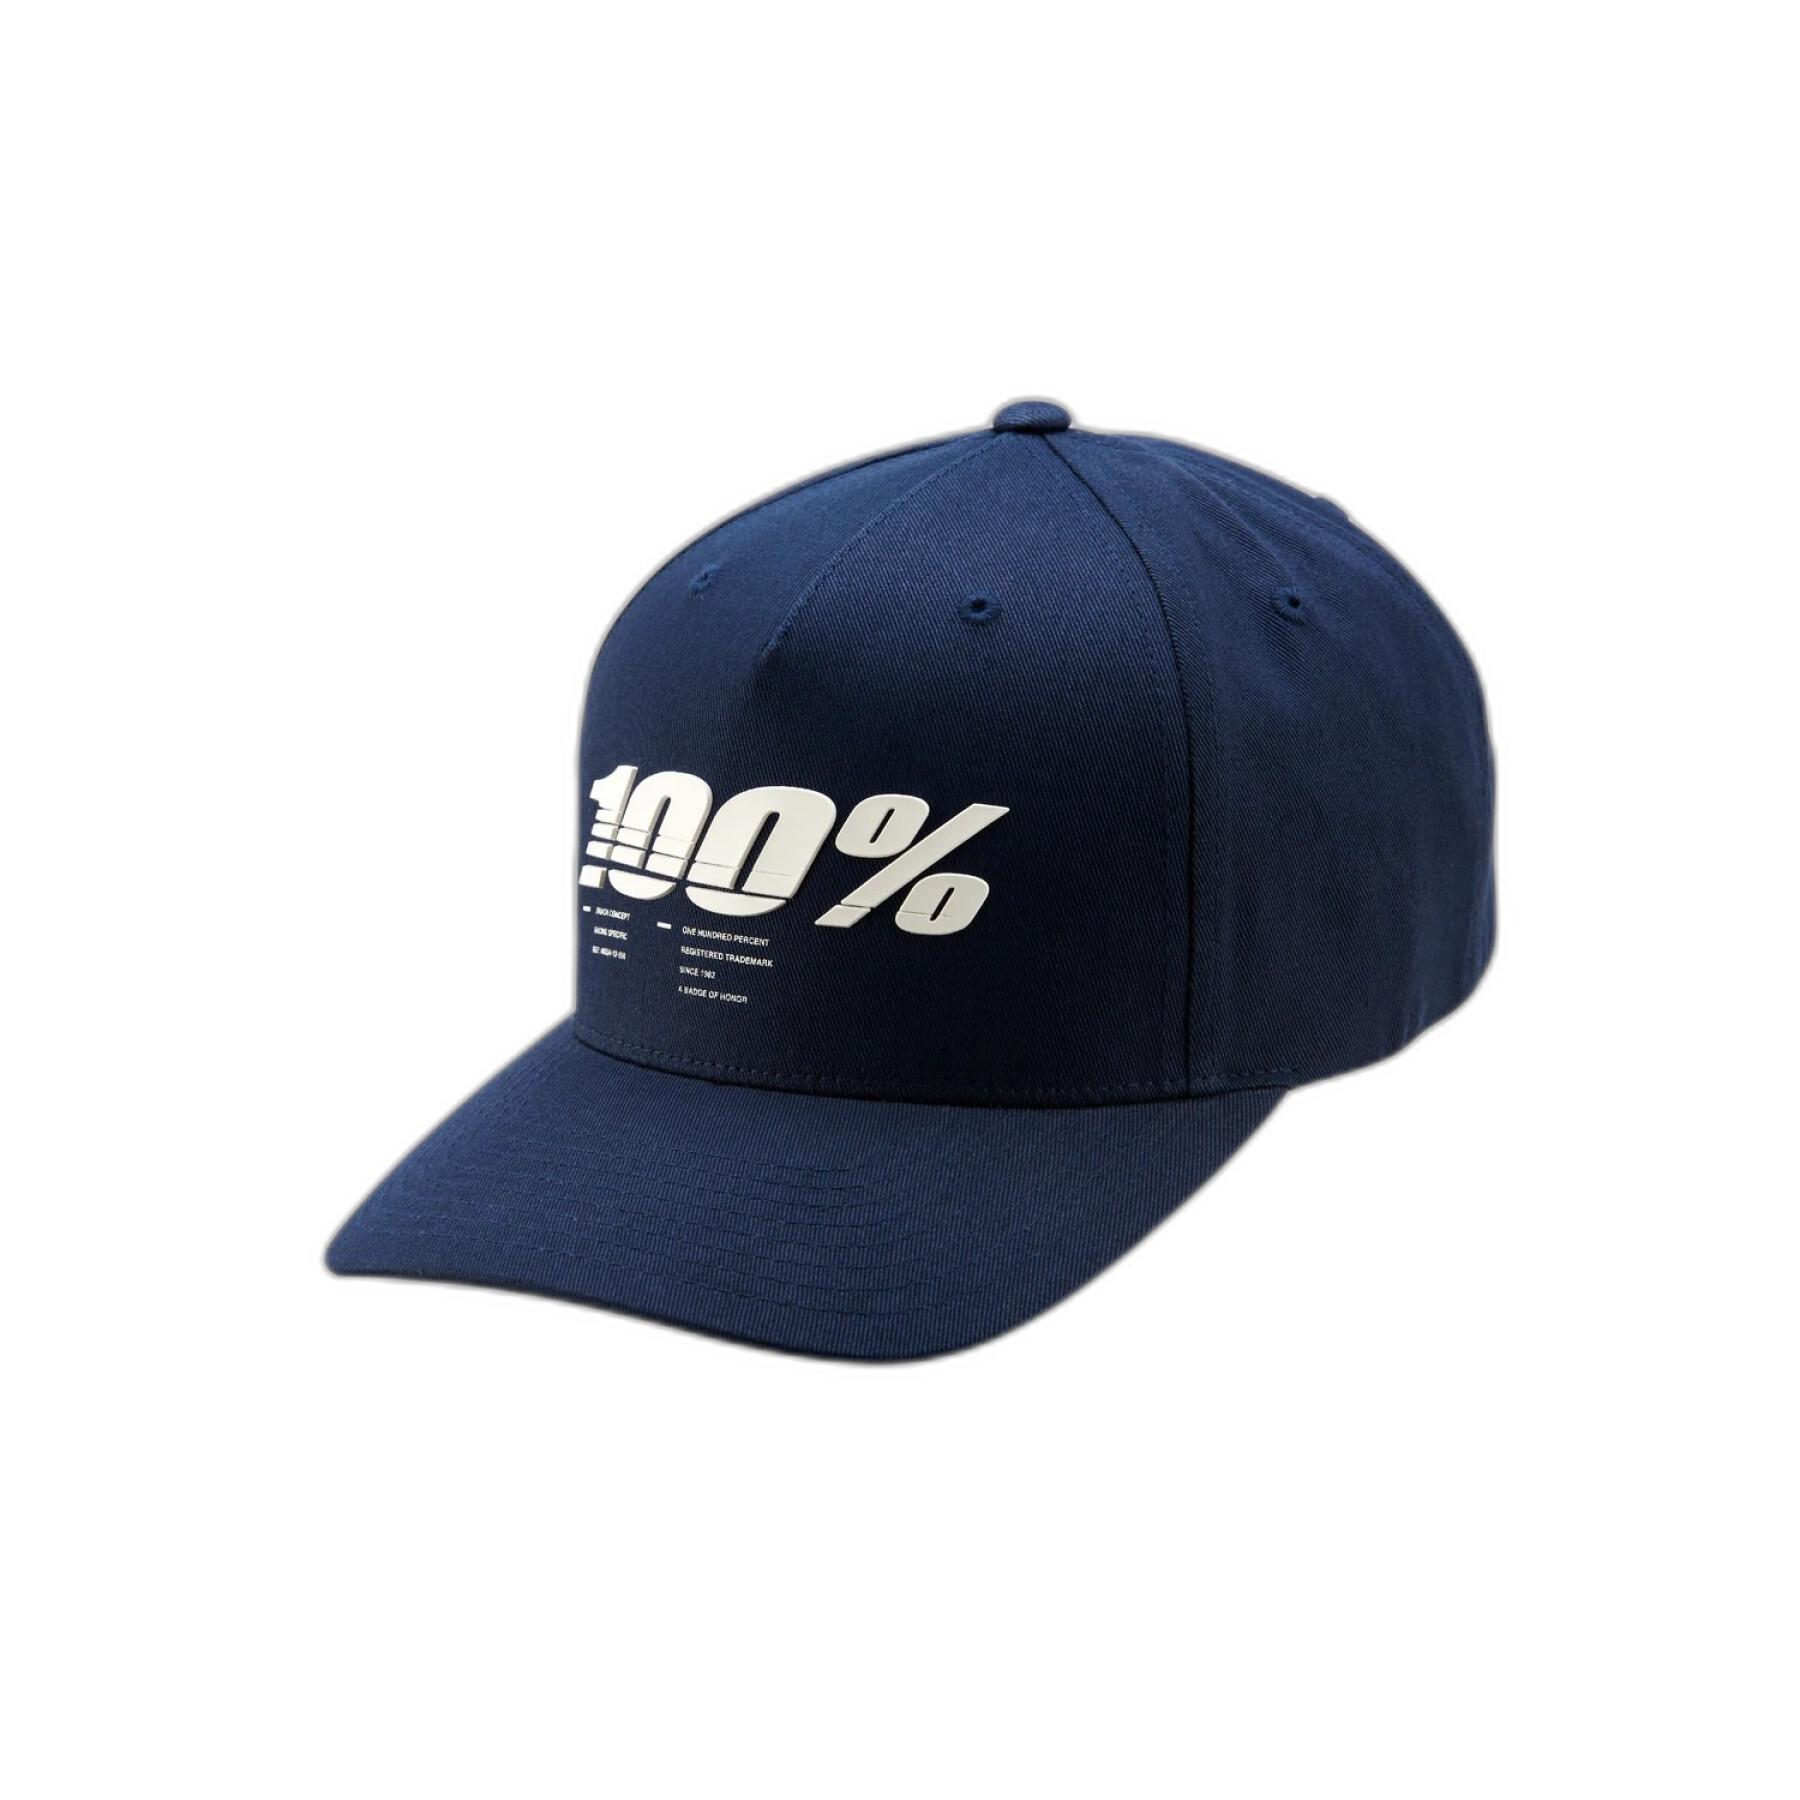 Pet 100% staunch snapback x-fit